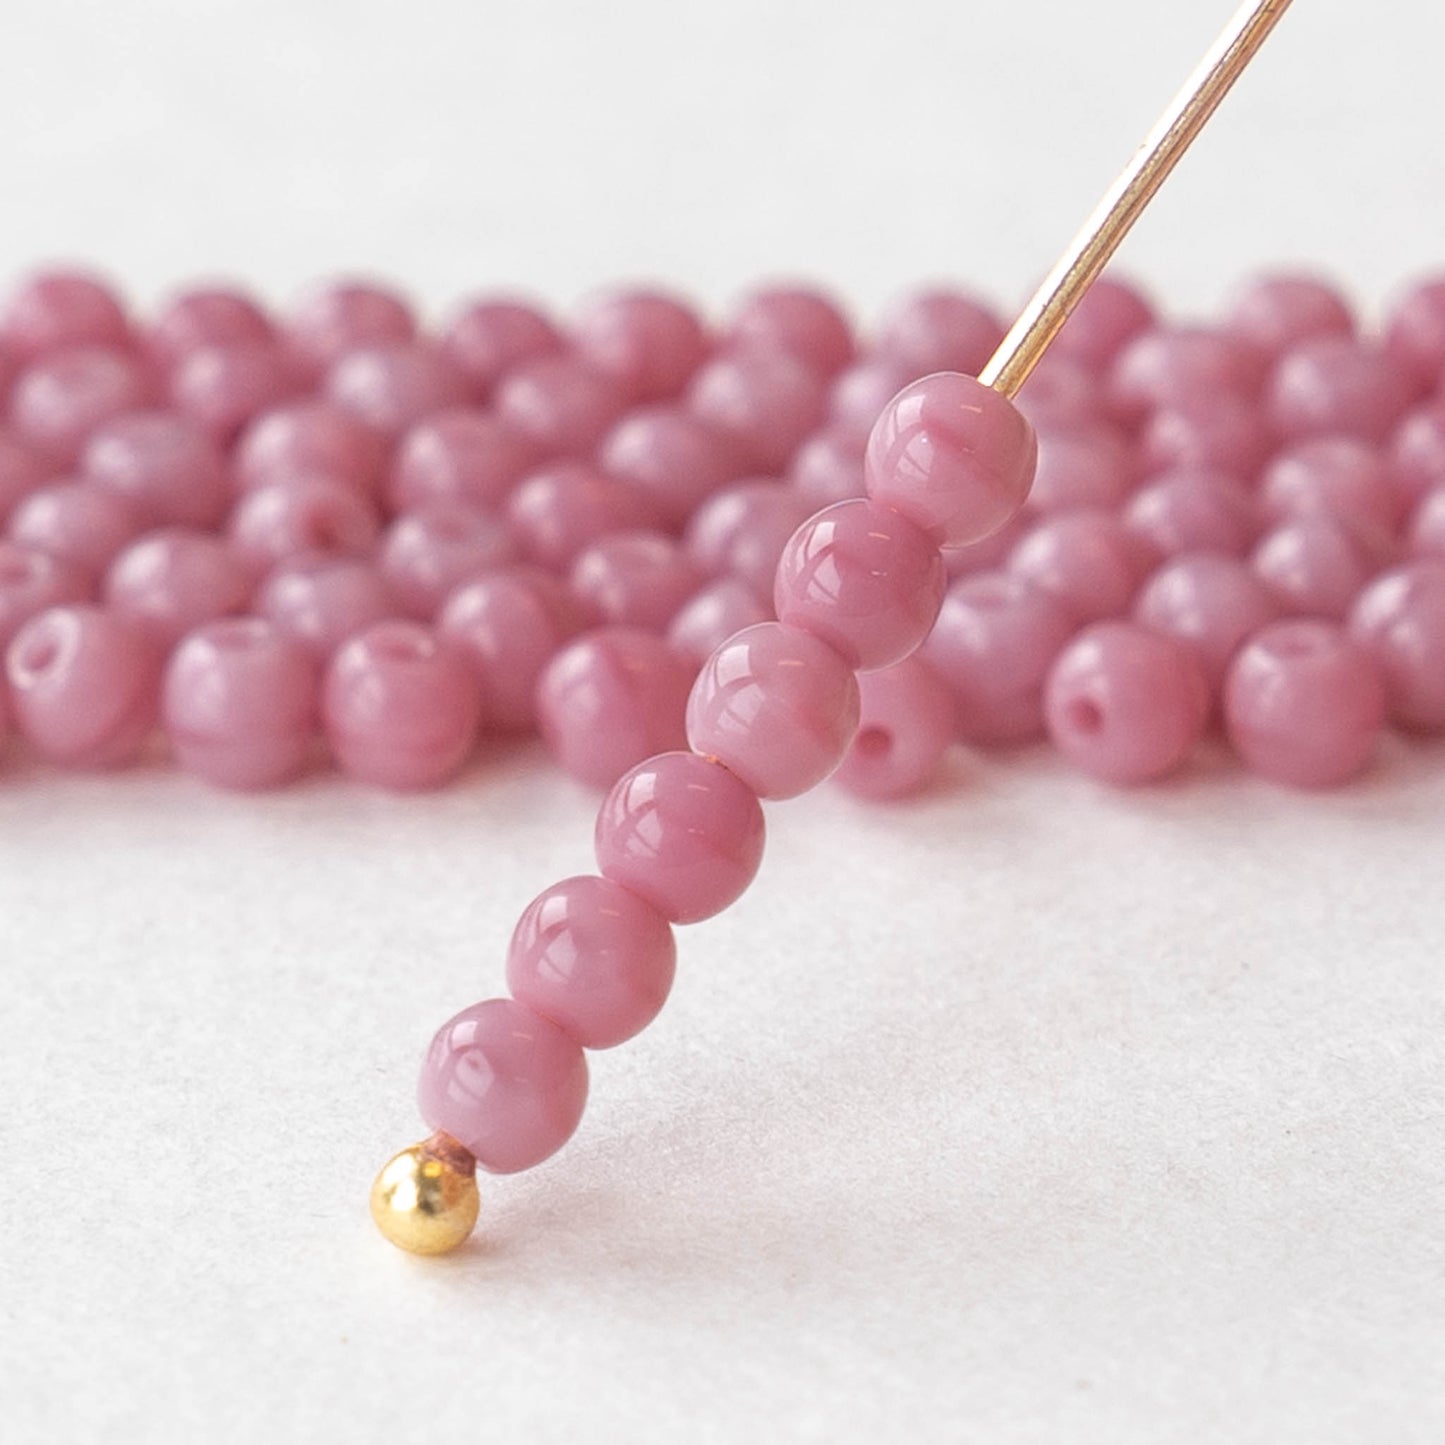 3mm Round Glass Beads - Opaque Vintage Pink  - 120 Beads